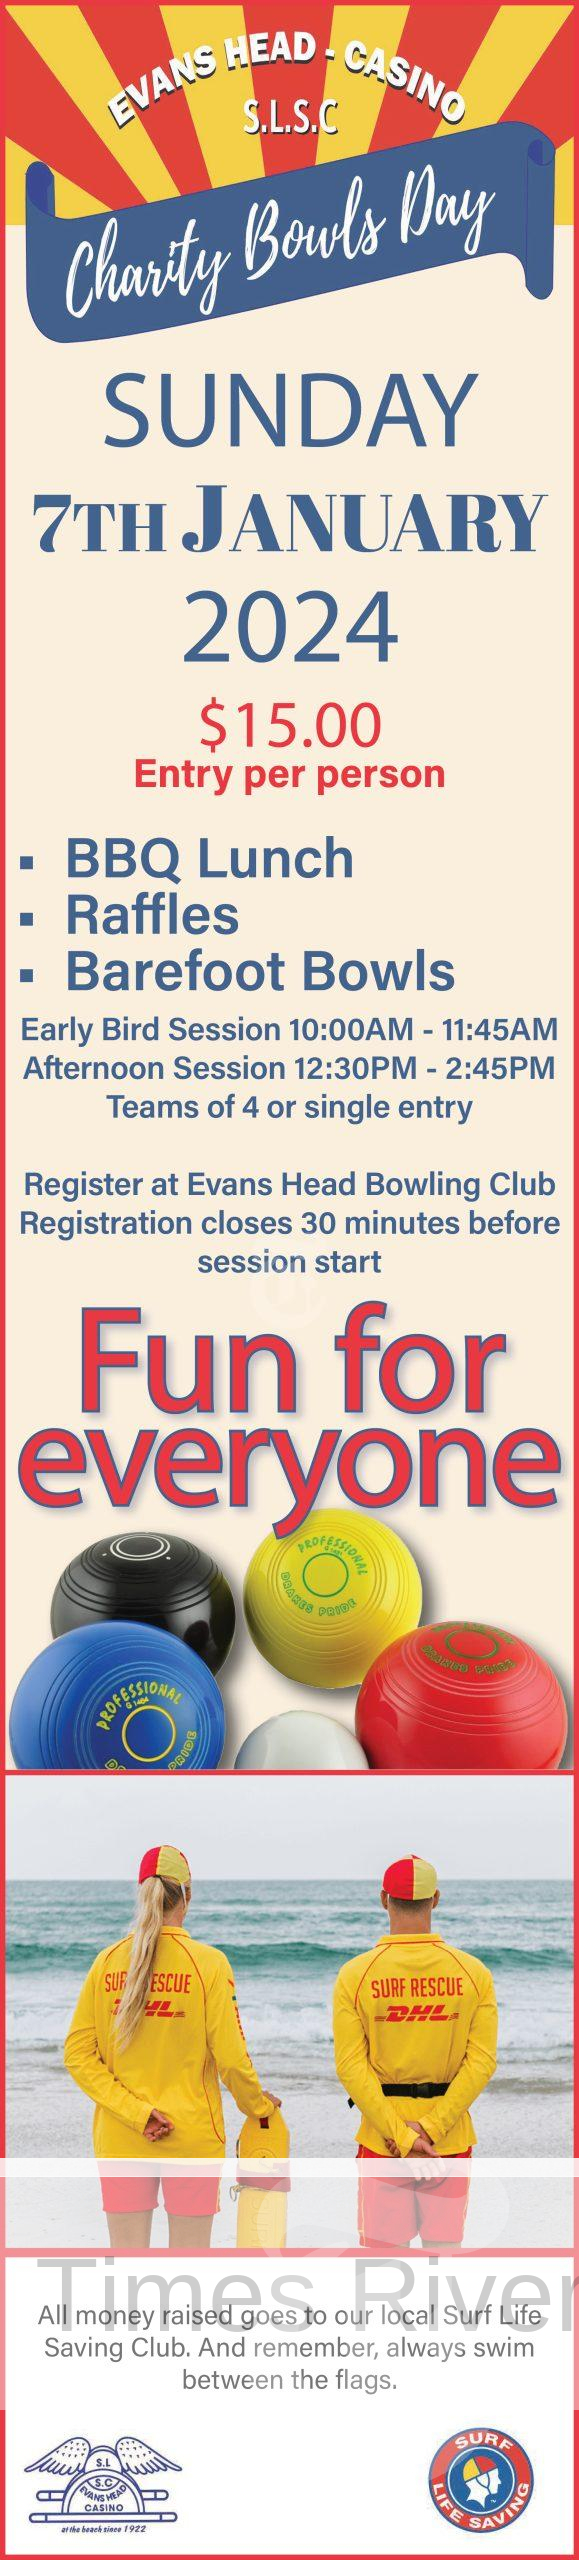 EVANS HEAD - CASINO S.L.S.C. Charity Bowls Day